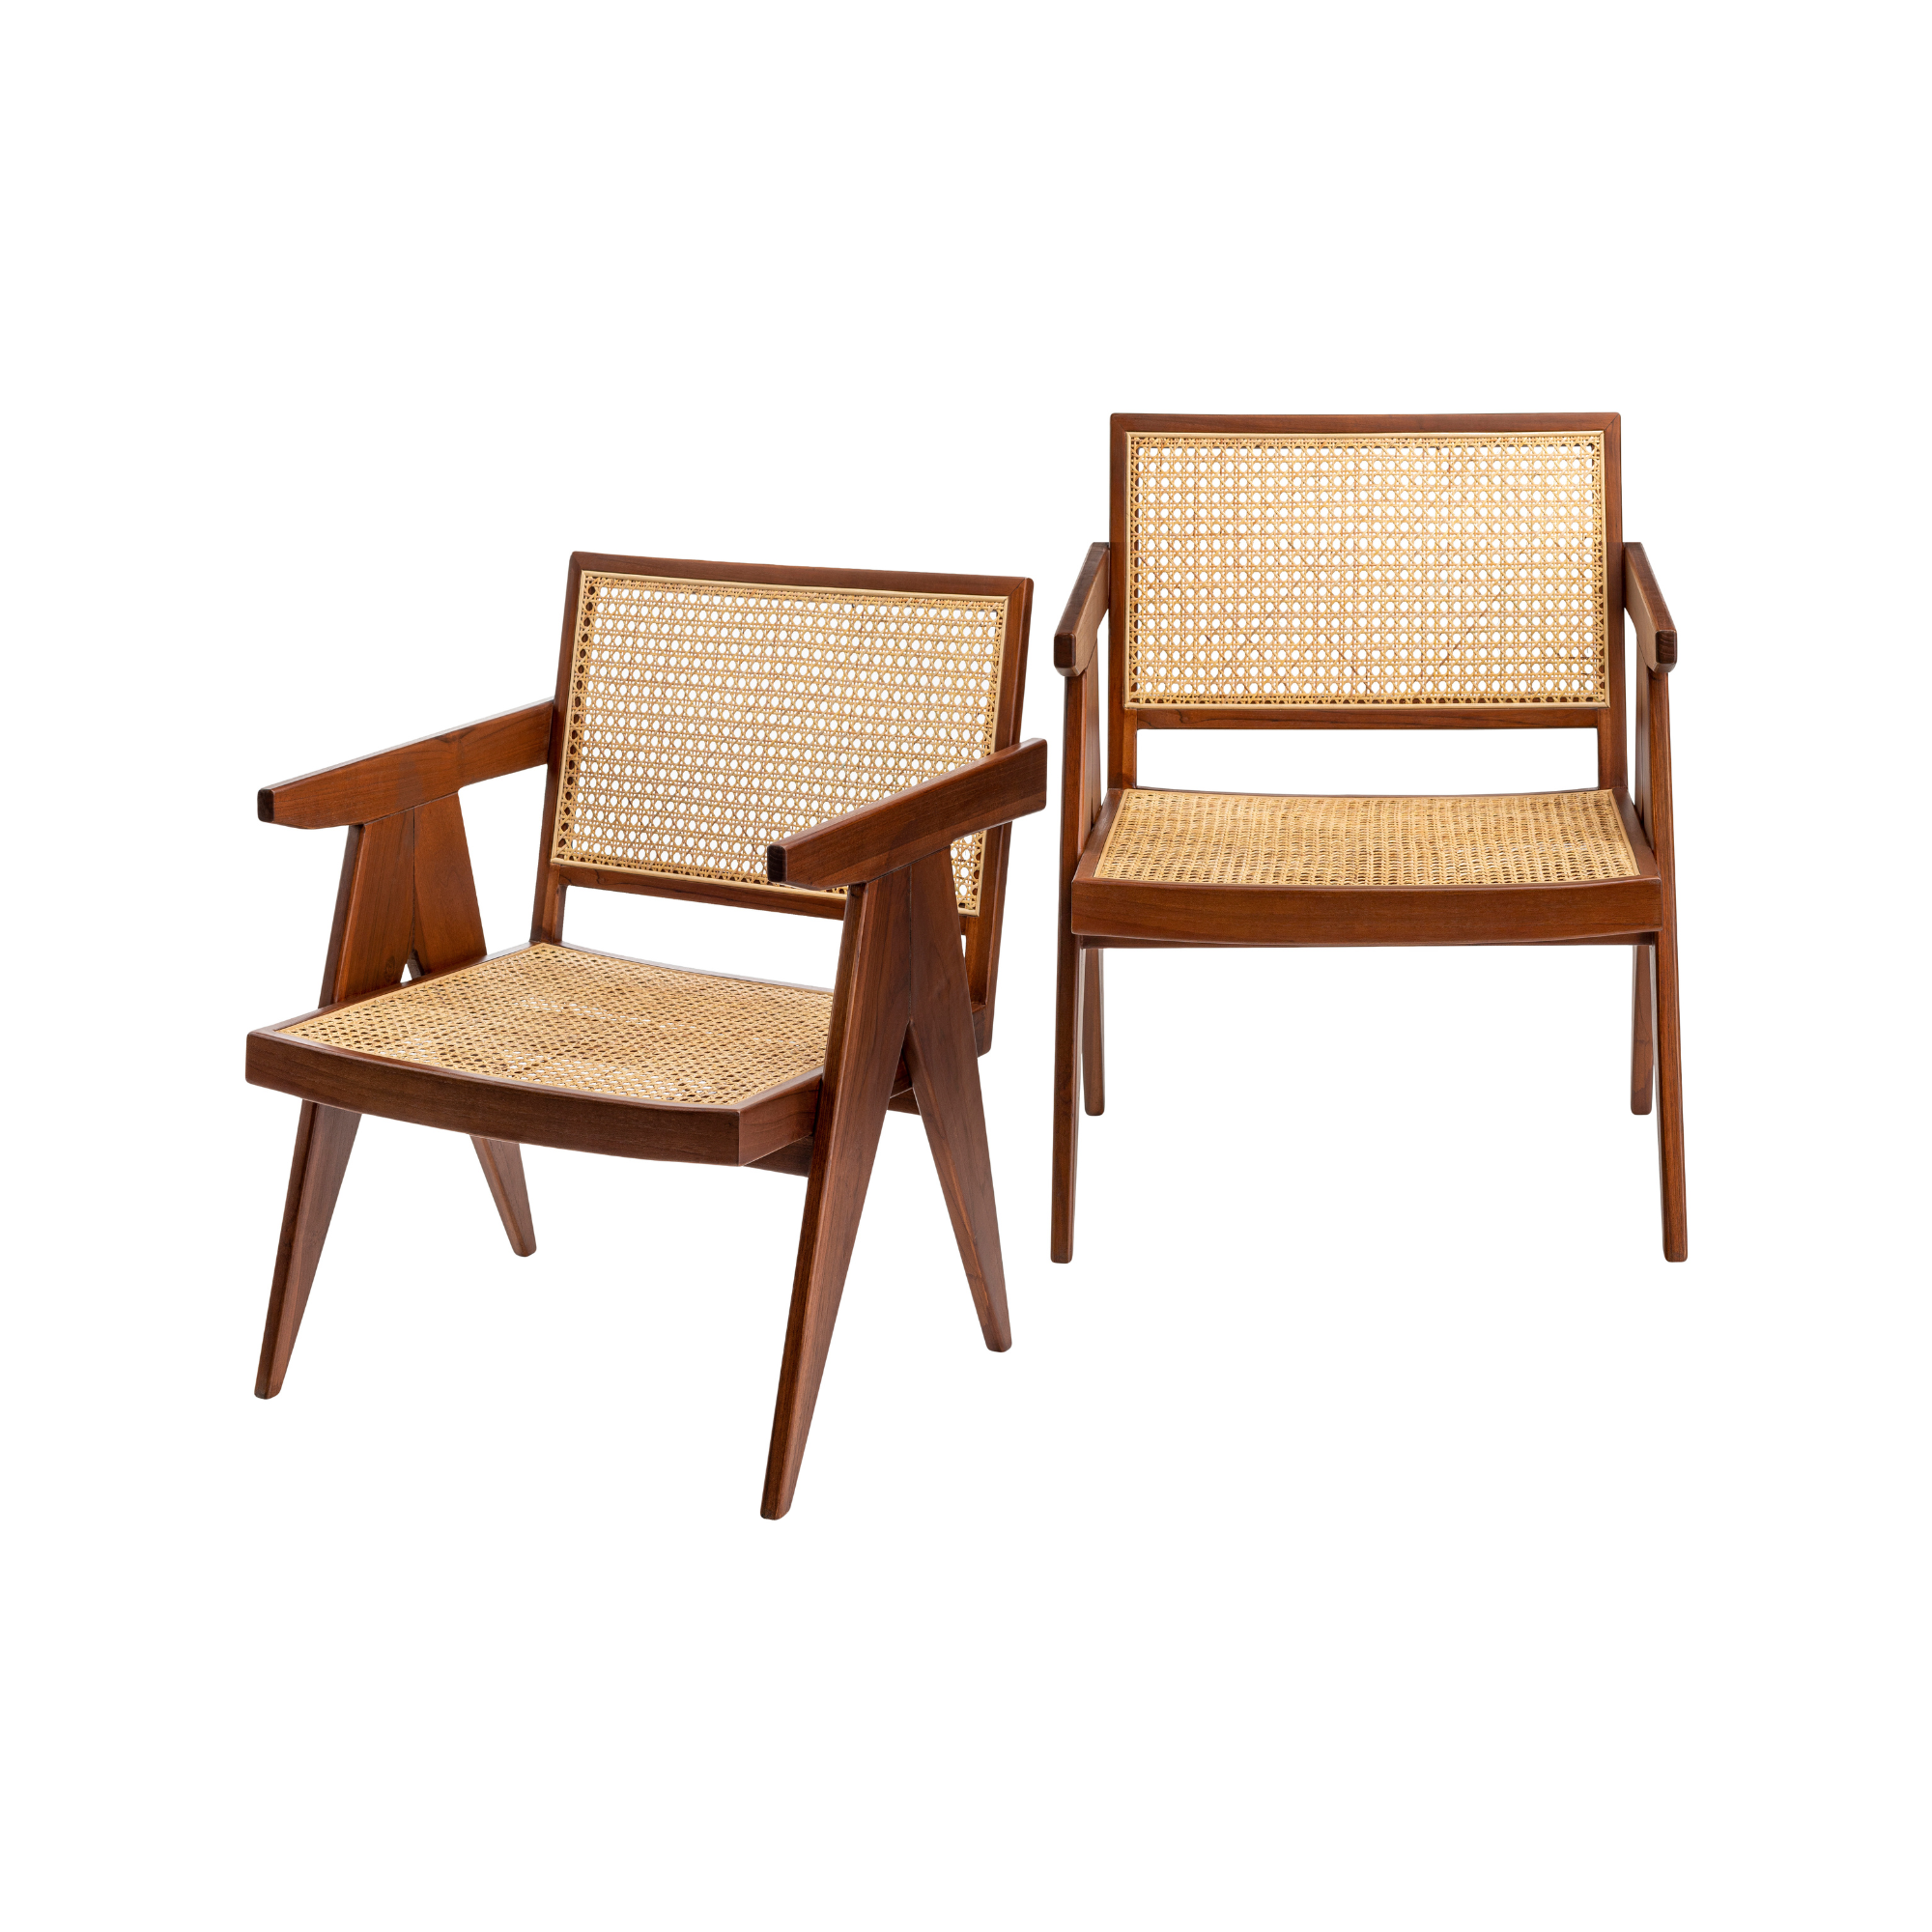 Hailey Dining Chair, Set of 2